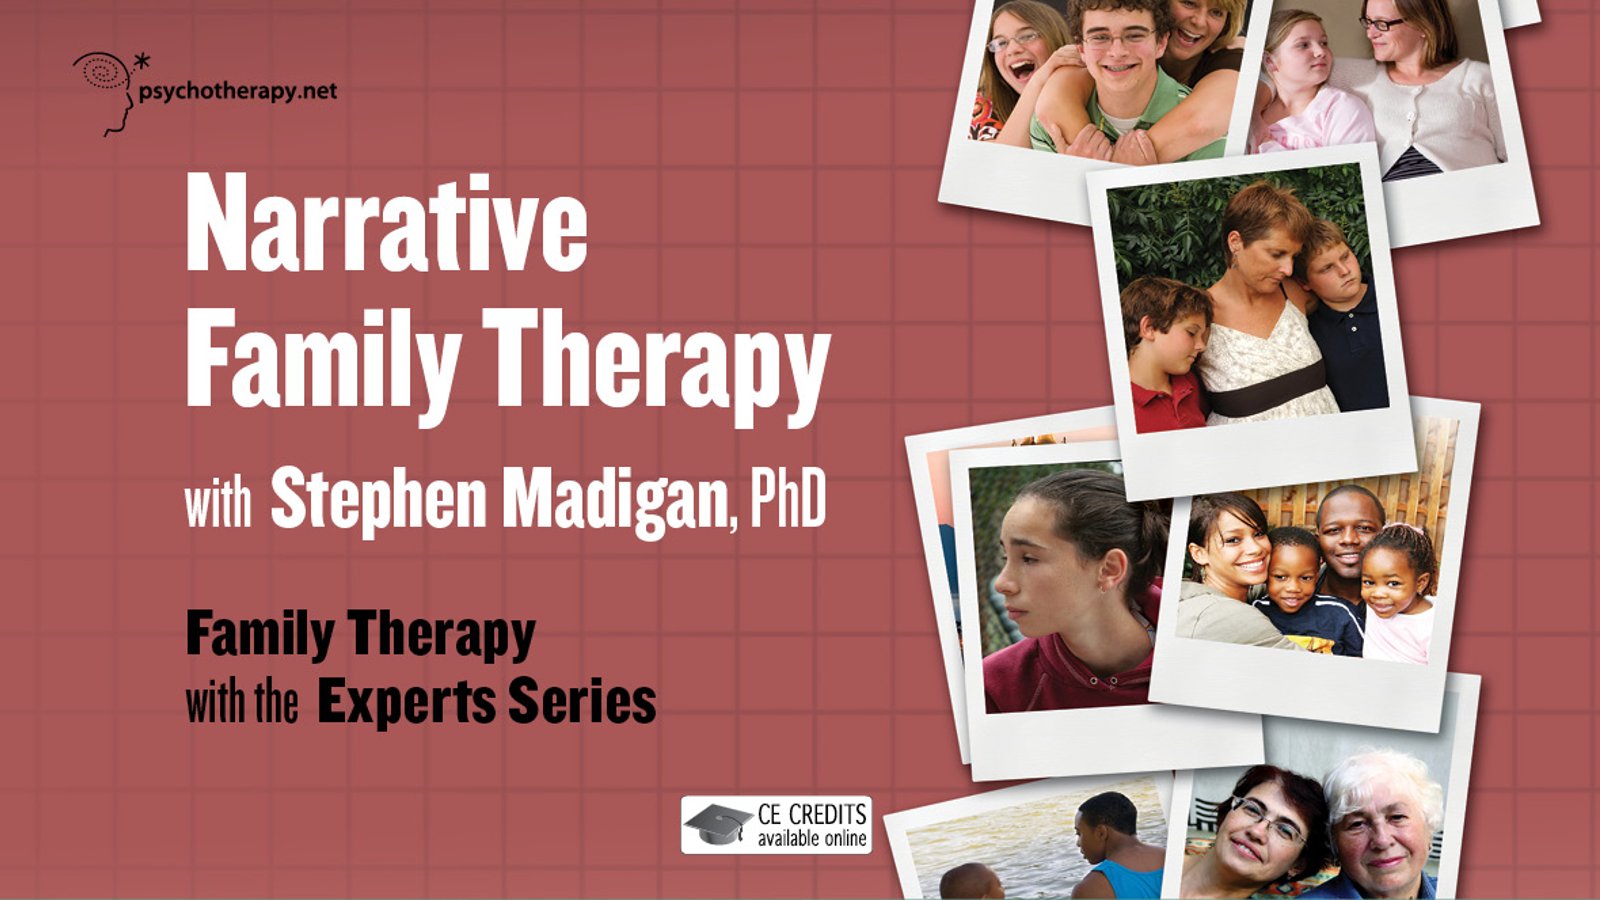 Narrative Family Therapy - With Stephen Madigan